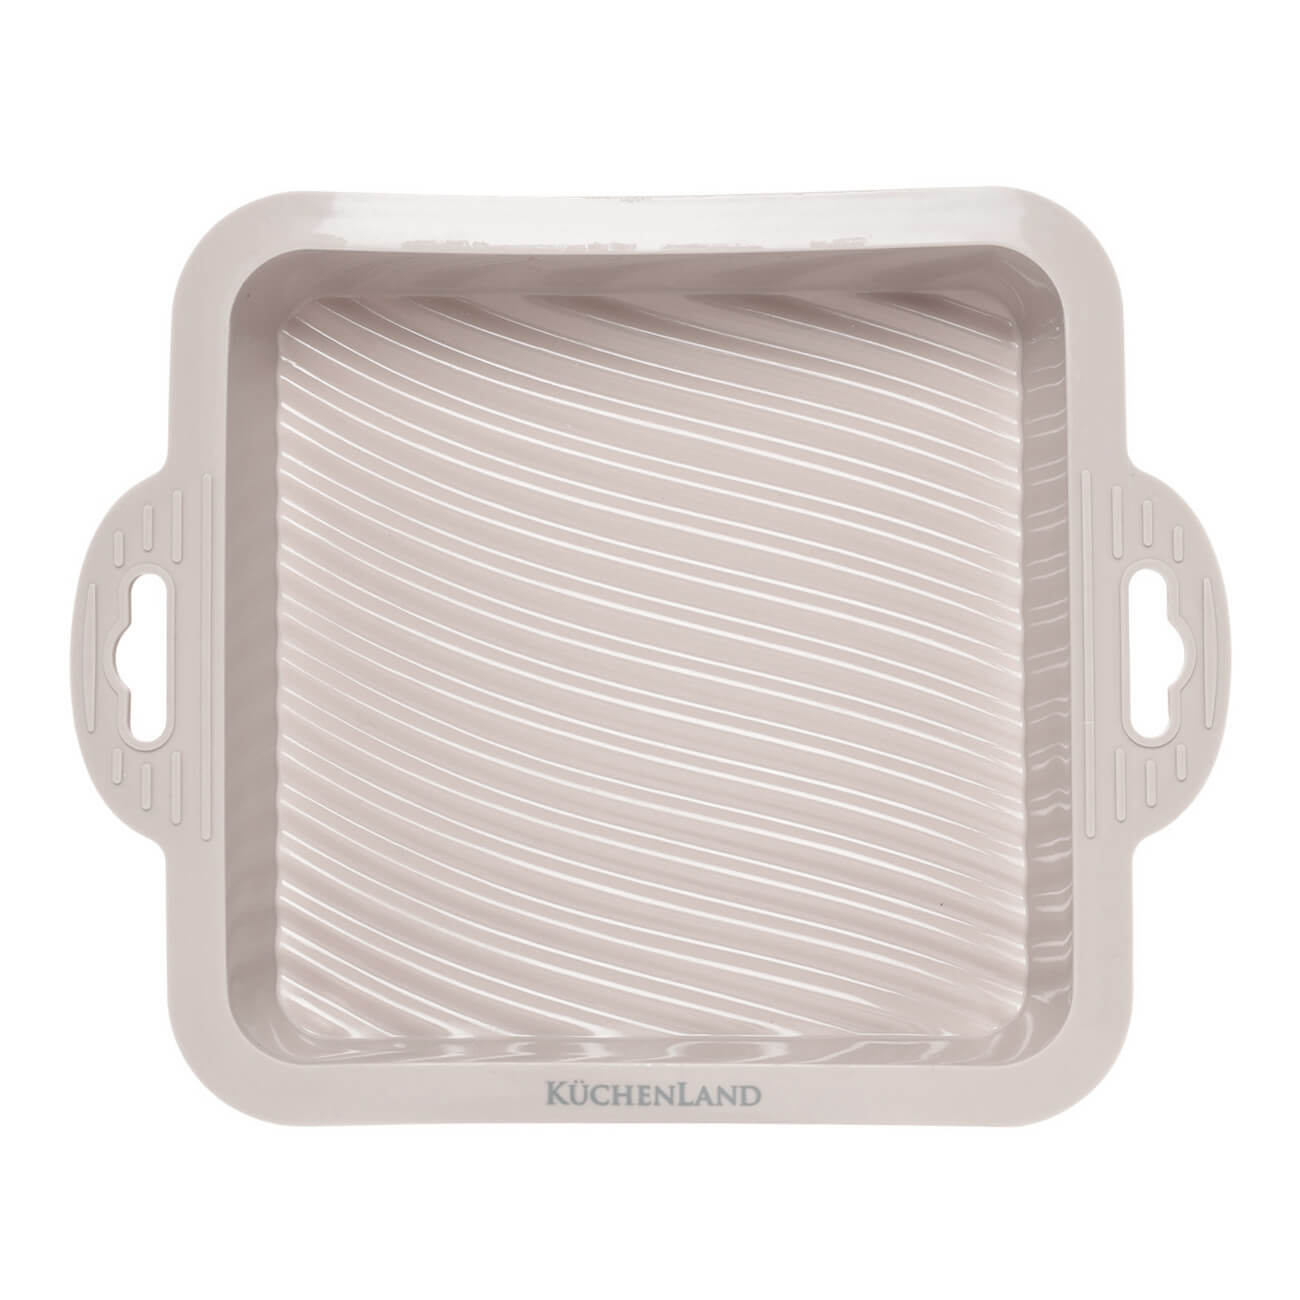 Baking dish, 22x18 cm, with handles, silicone, square, gray-brown, Bakery изображение № 1